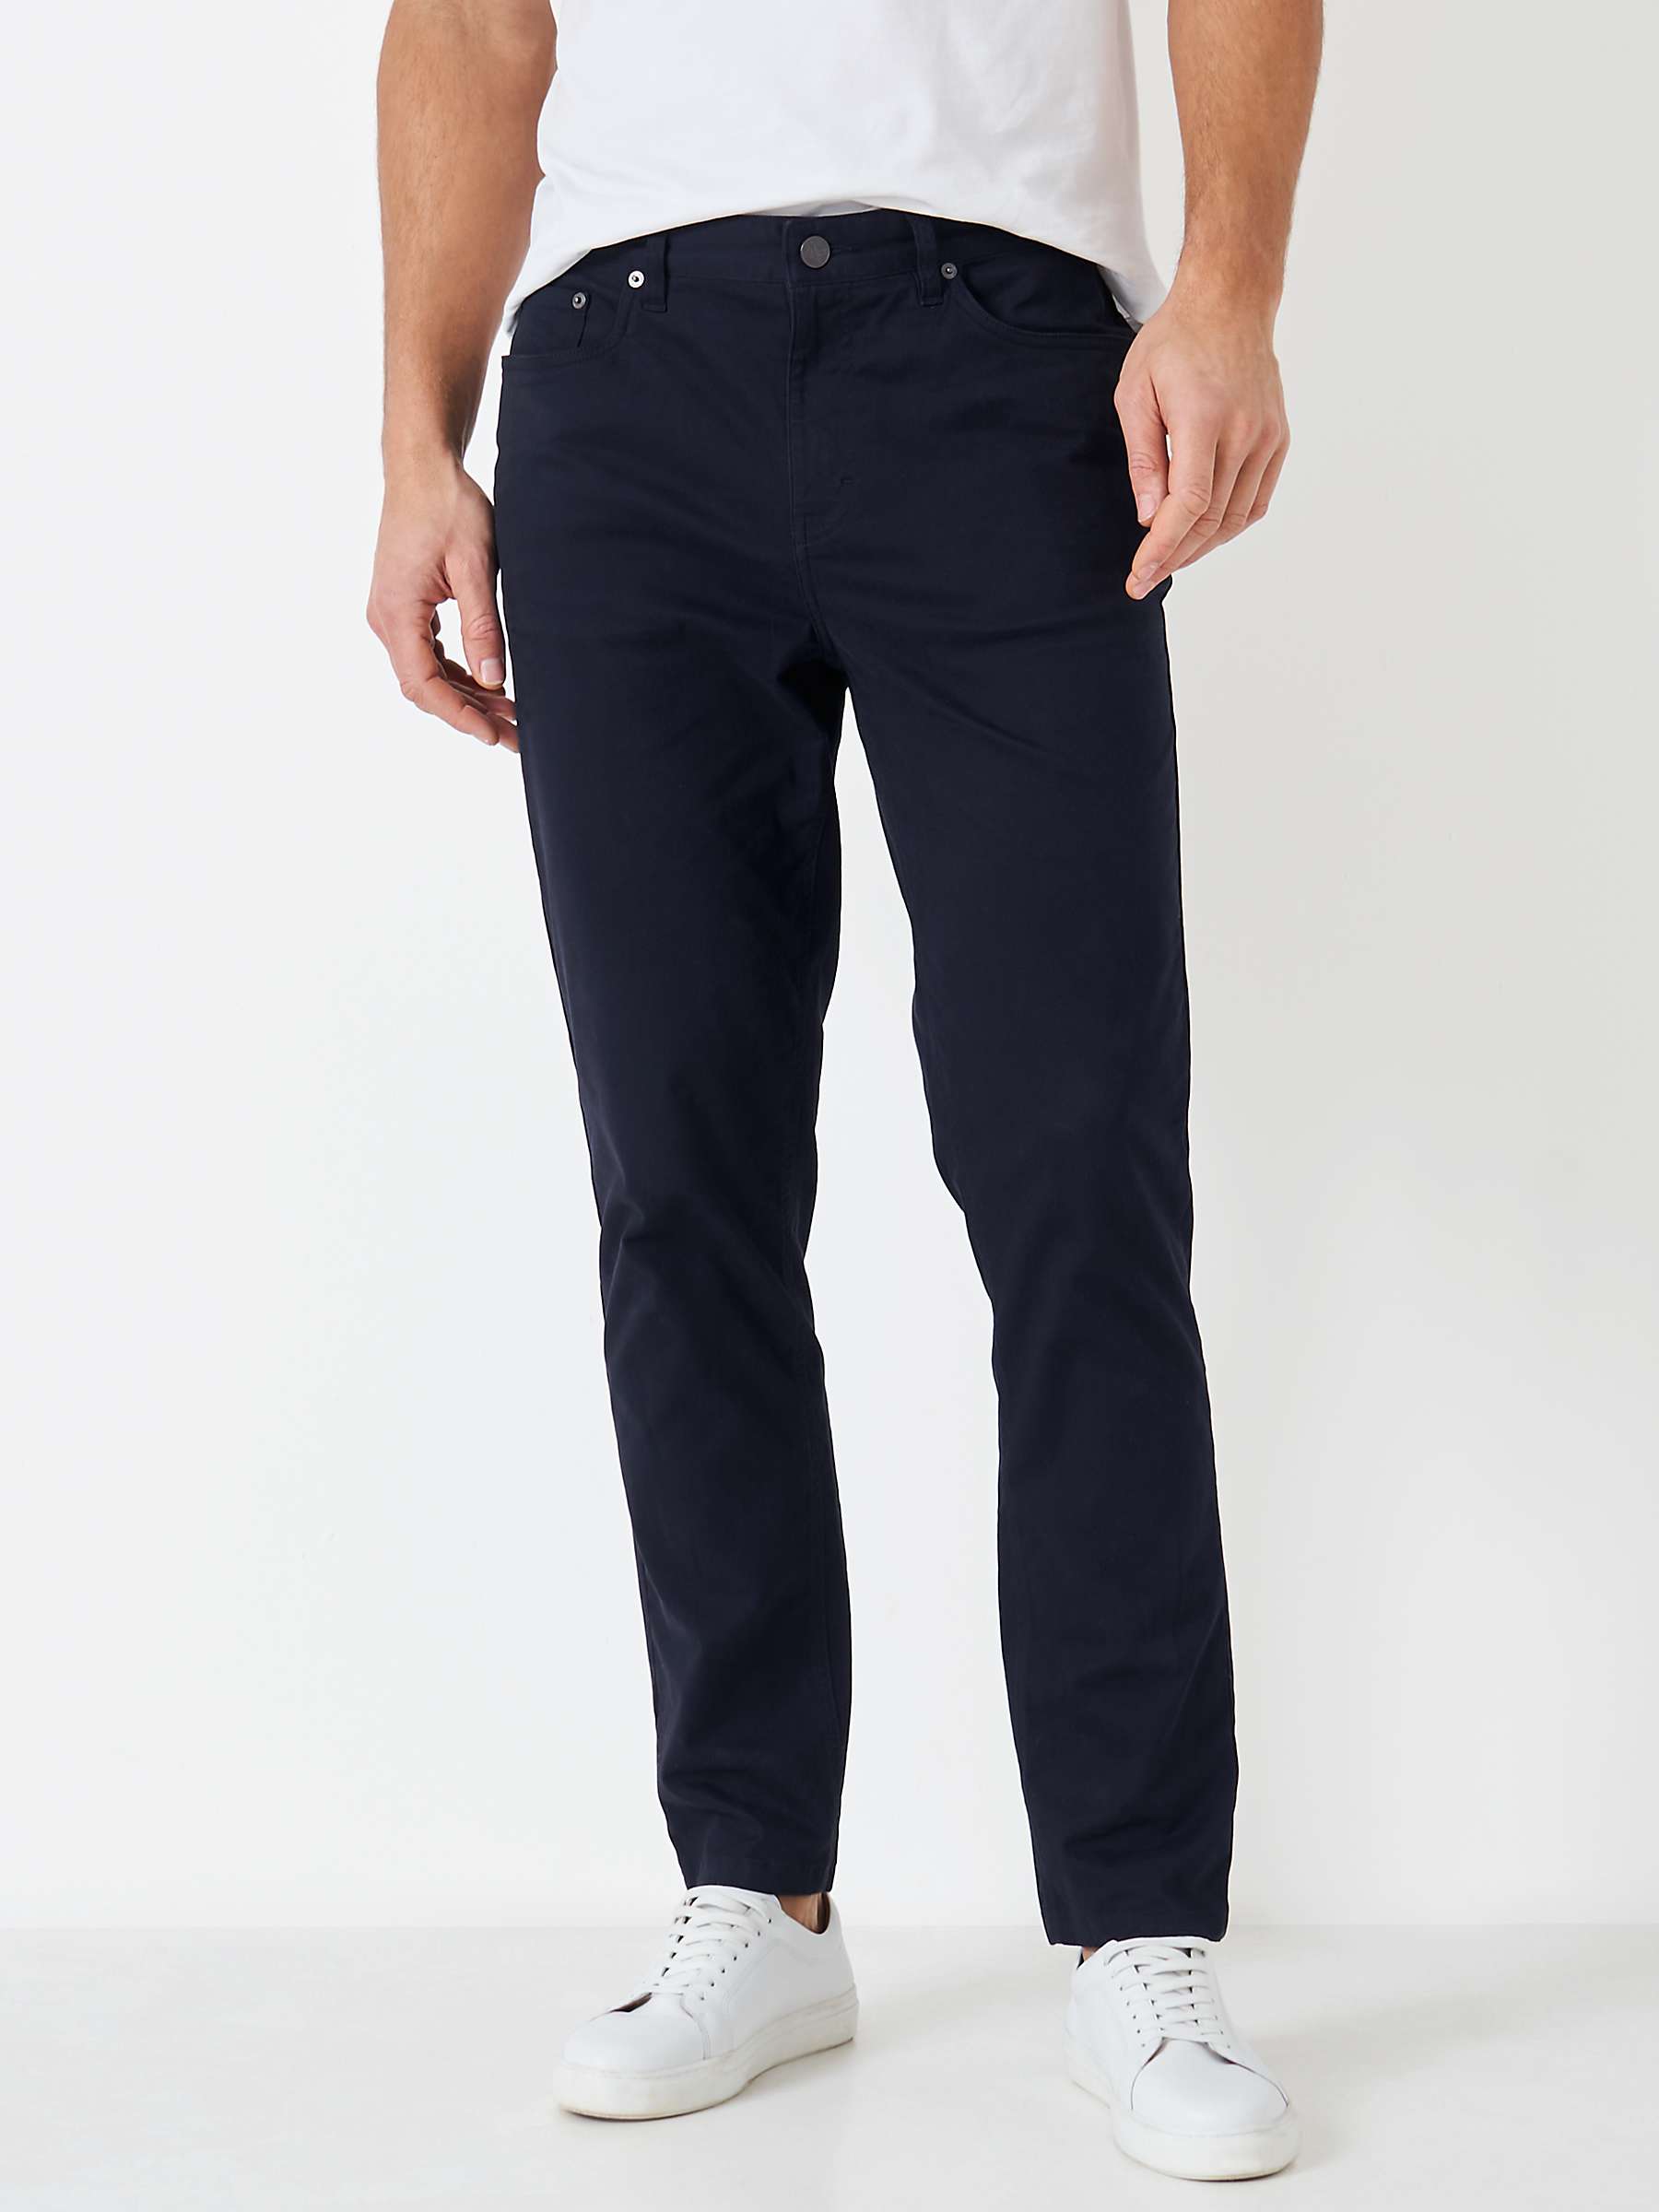 Crew Clothing Spencer Slim Fit Trousers, Navy at John Lewis & Partners